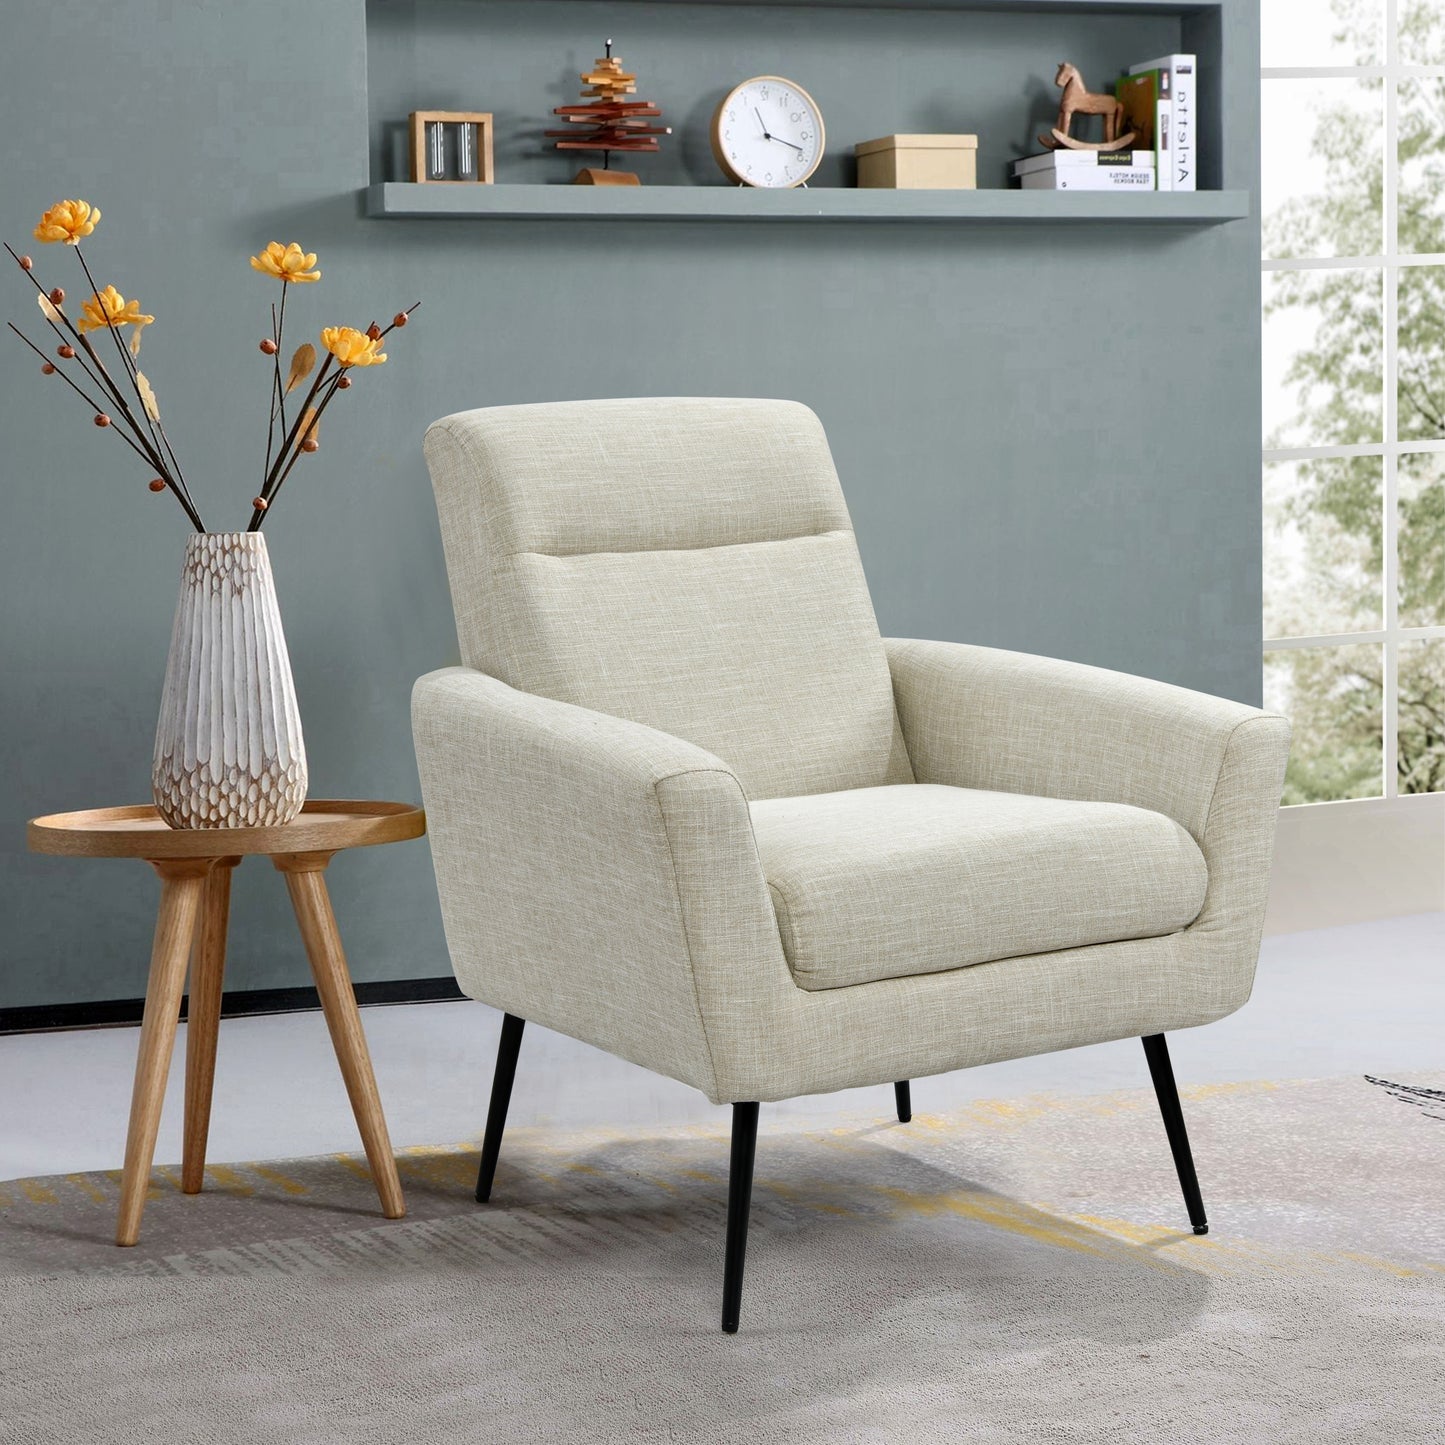 Mid Century Modern Upholstered Fabric Accent Chair, Living Room, Bedroom Leisure Single Sofa Chair (with Metal Legs), TV armrest seat, Suitable for Small Space Home, Office, Coffee Chair,Beige